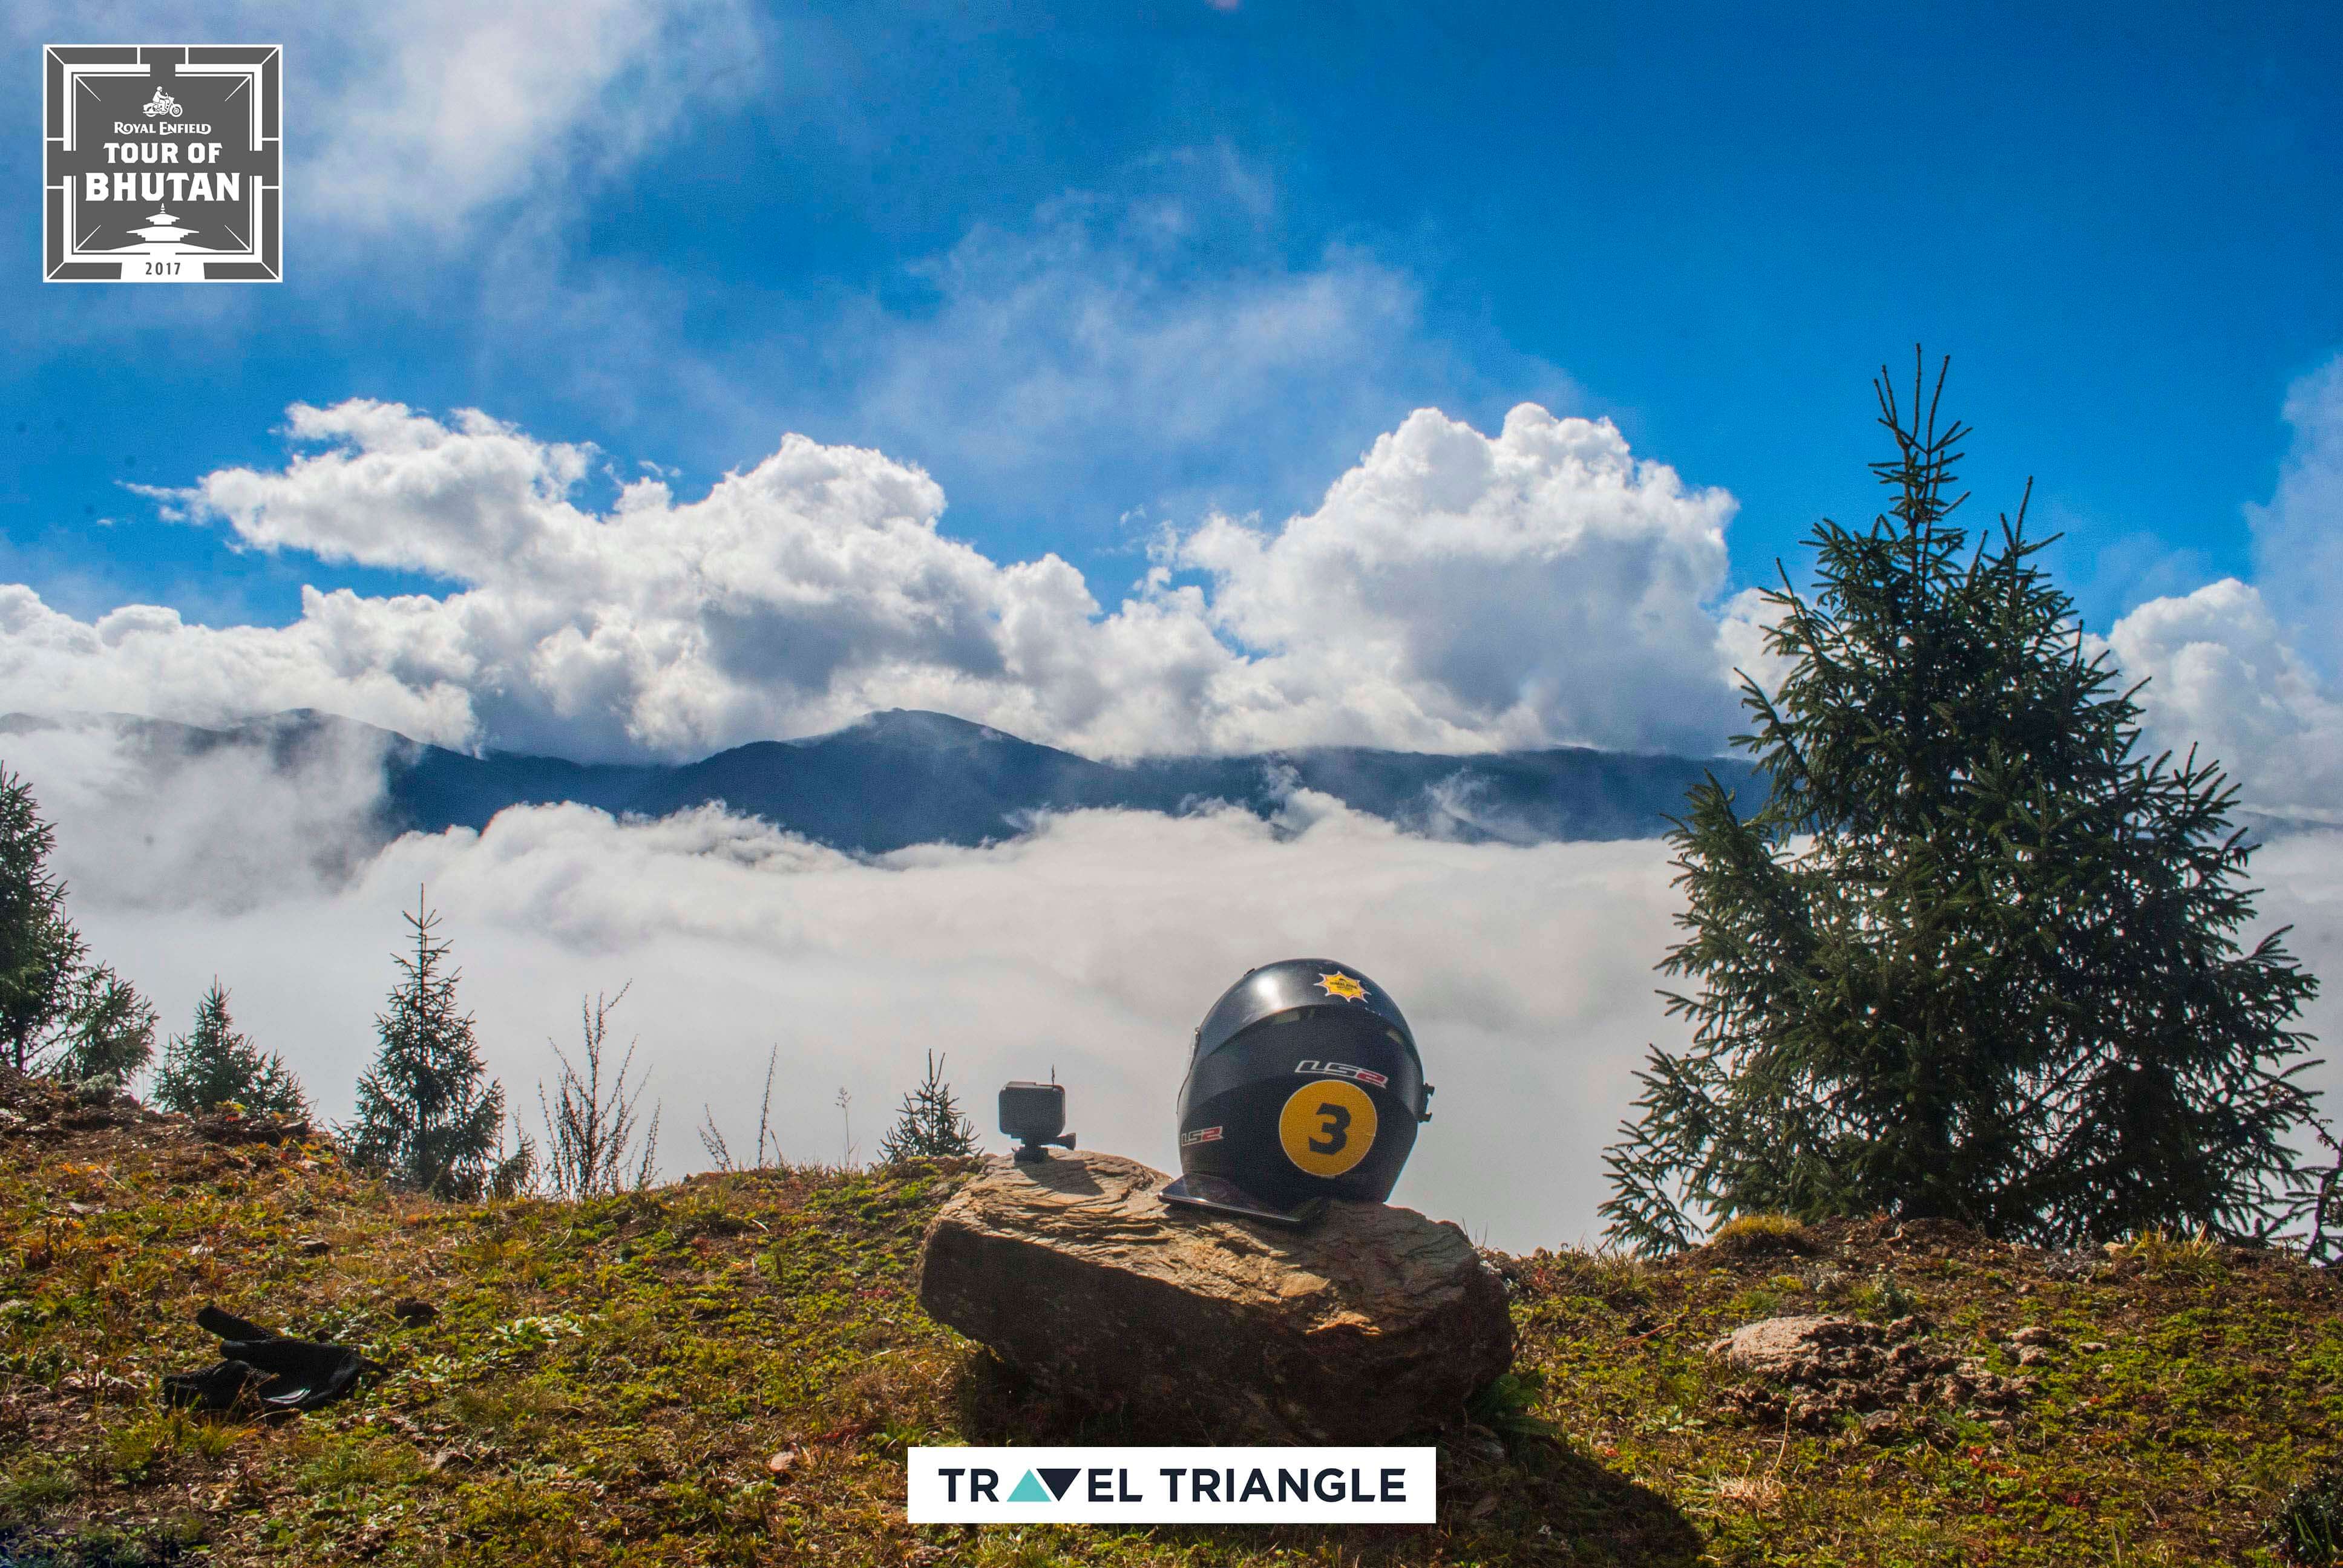 royal enfield india bhutan road trip: a bike helmet and clouds beyond it on the hill